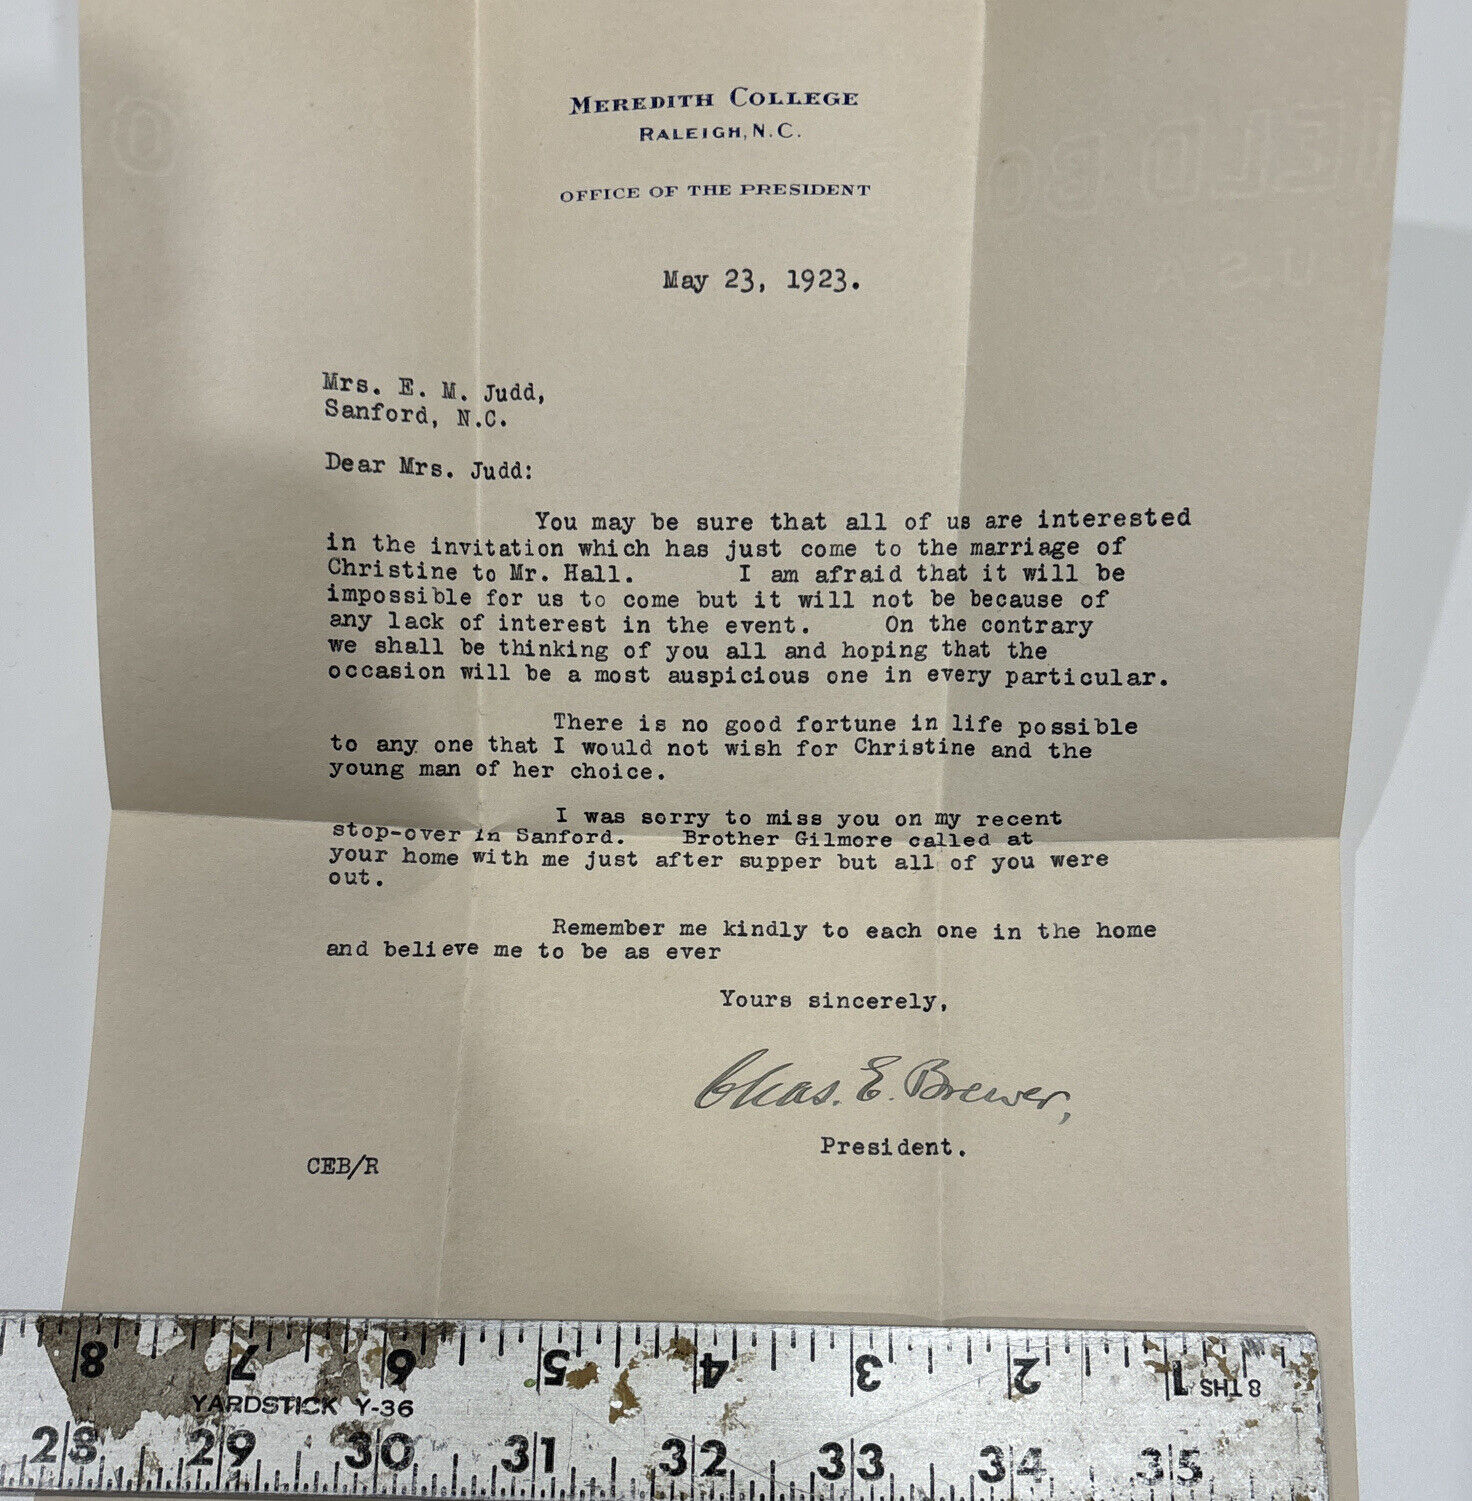 ANTIQUE LETTER CHARLES E. BREWER President MEREDITH COLLEGE 1923